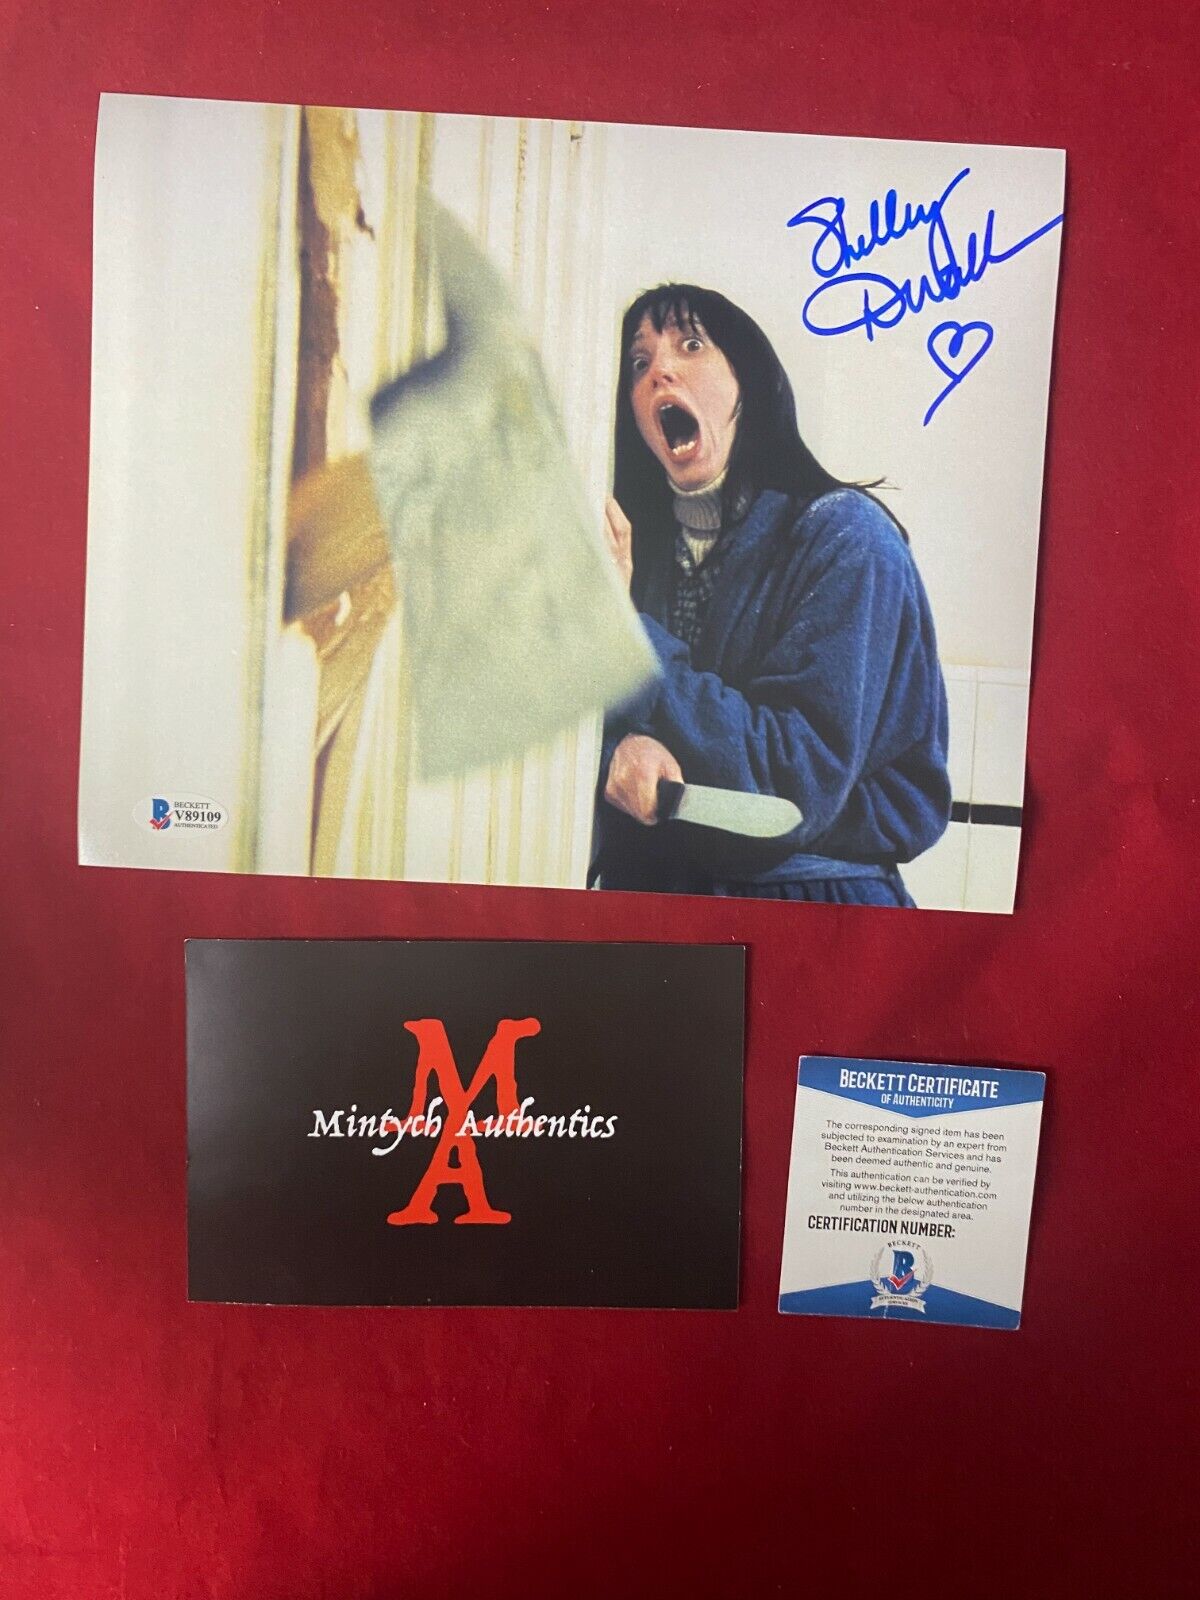 SHELLEY DUVALL AUTOGRAPHED SIGNED 8x10 Photo Poster painting! THE SHINING! BECKETT STEPHEN KING